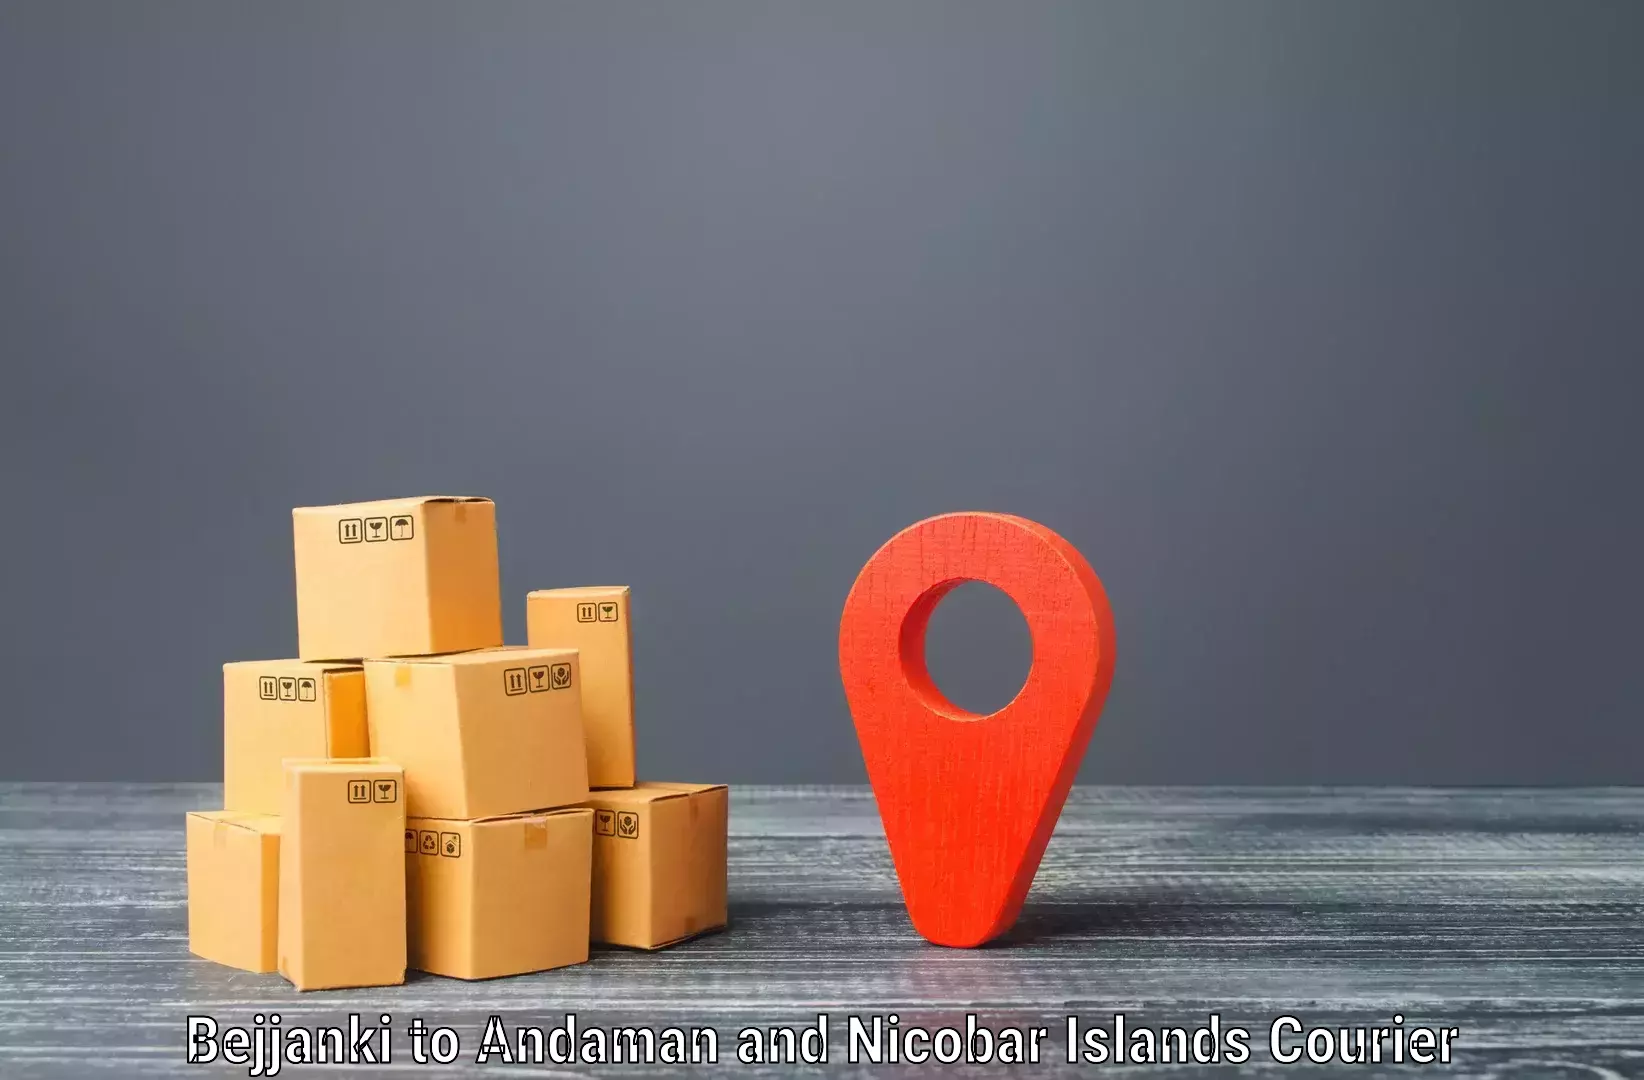 On-call courier service Bejjanki to Andaman and Nicobar Islands